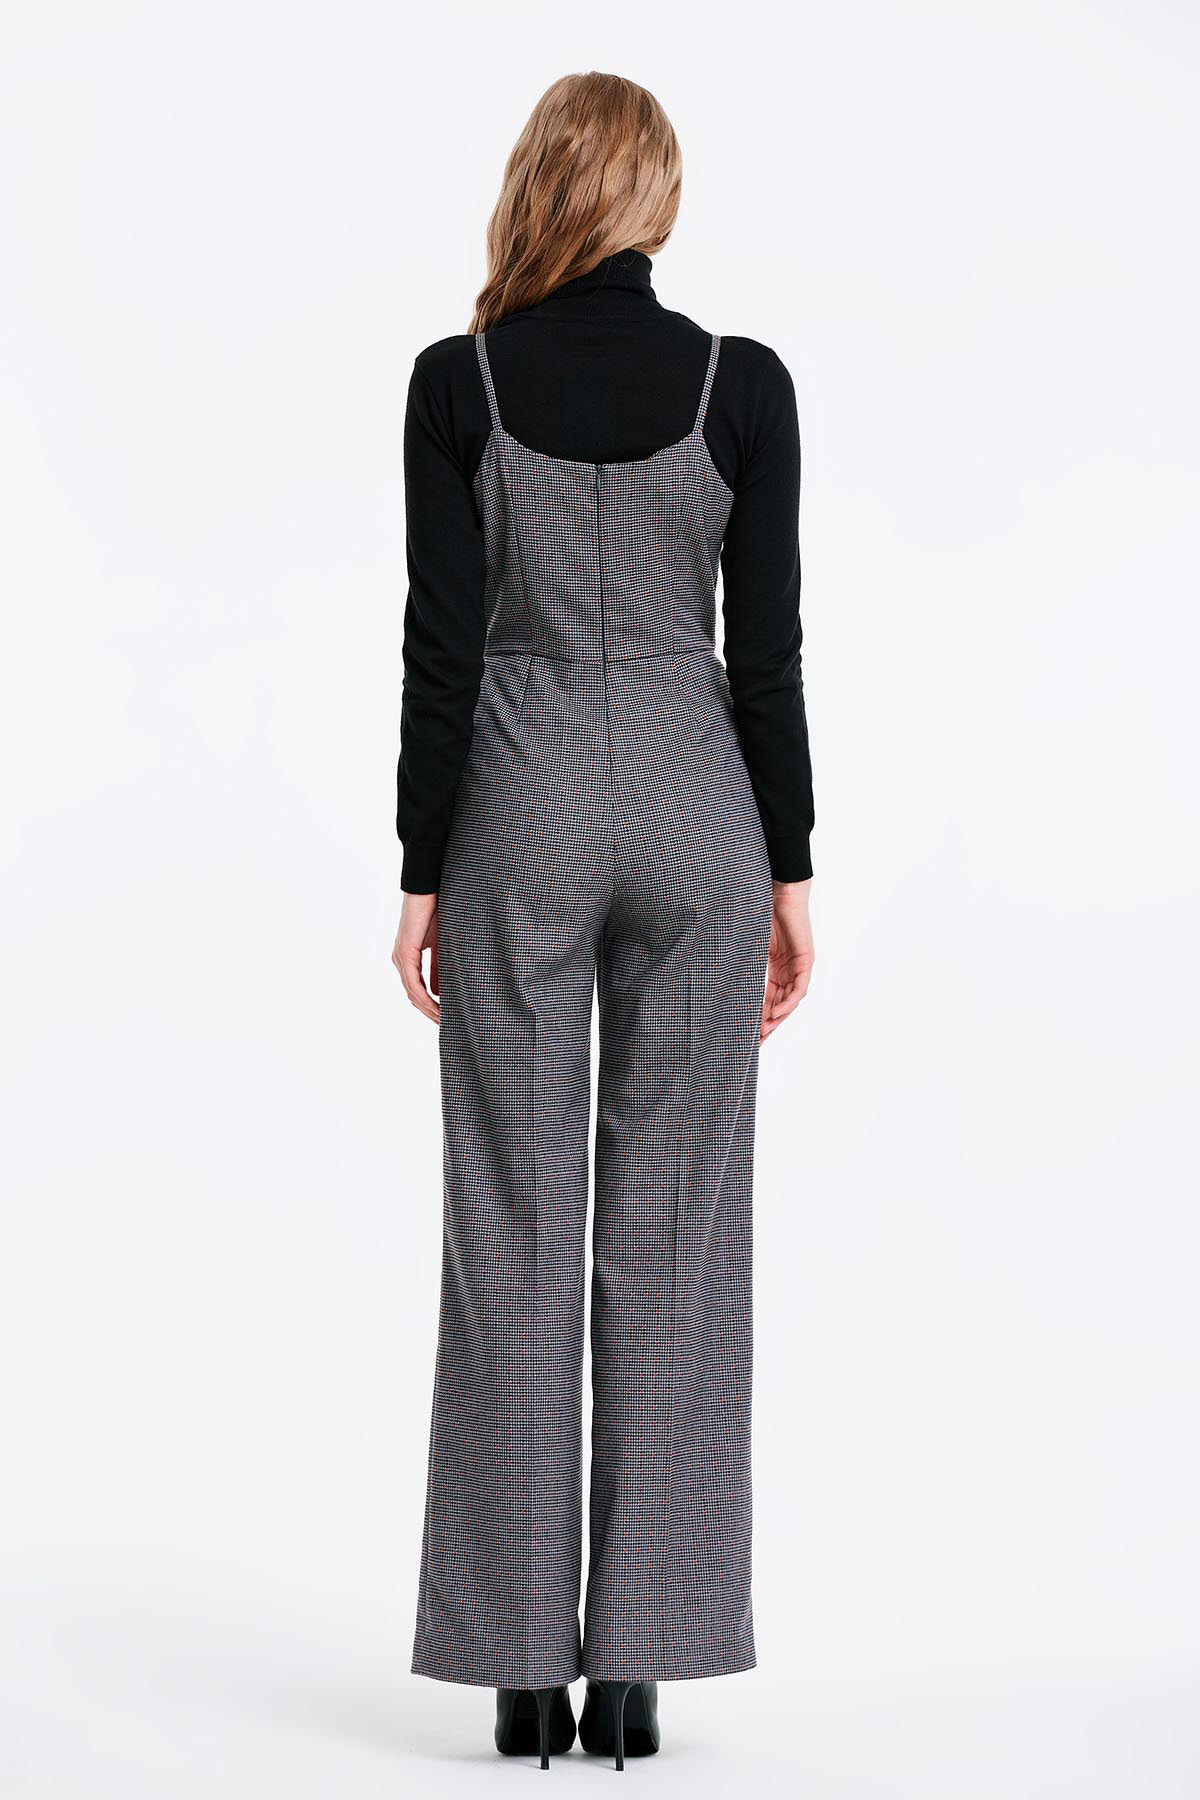 Grey jumpsuit with a houndstooth print, photo 5